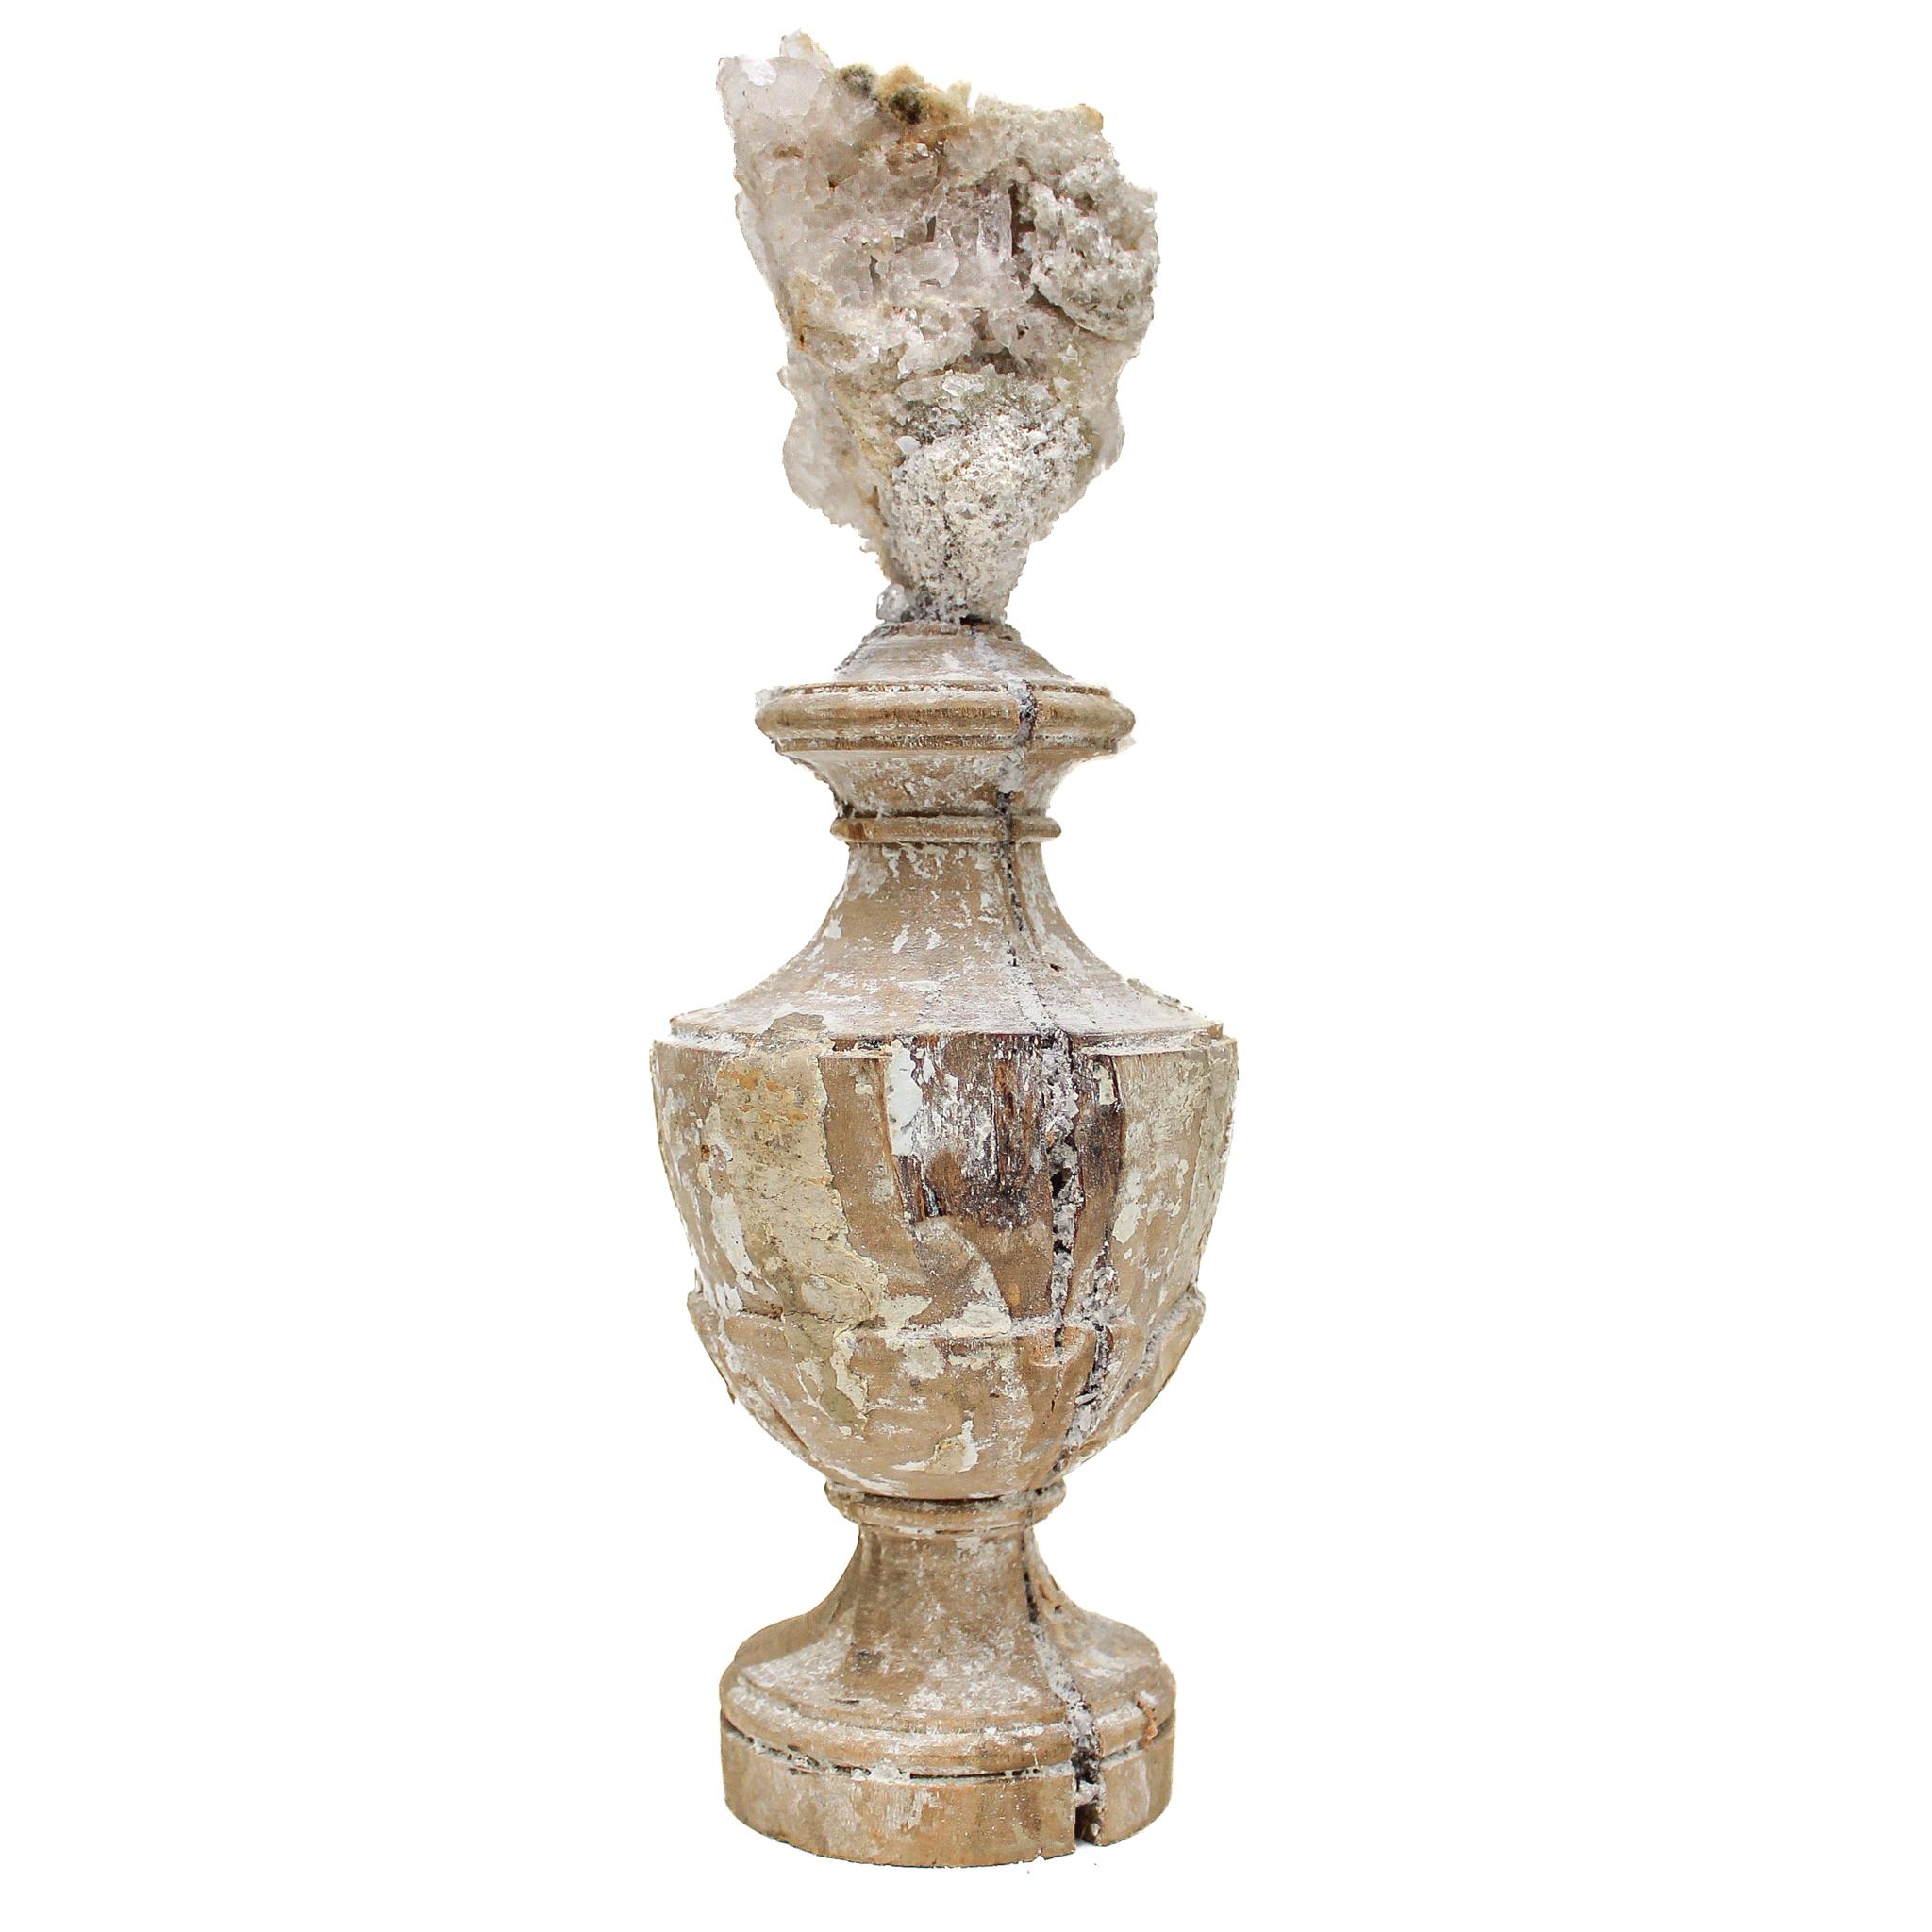 18th Century and Earlier 17th Century 'Florence Fragment' Vase with a Crystal Quartz Cluster with Calcite